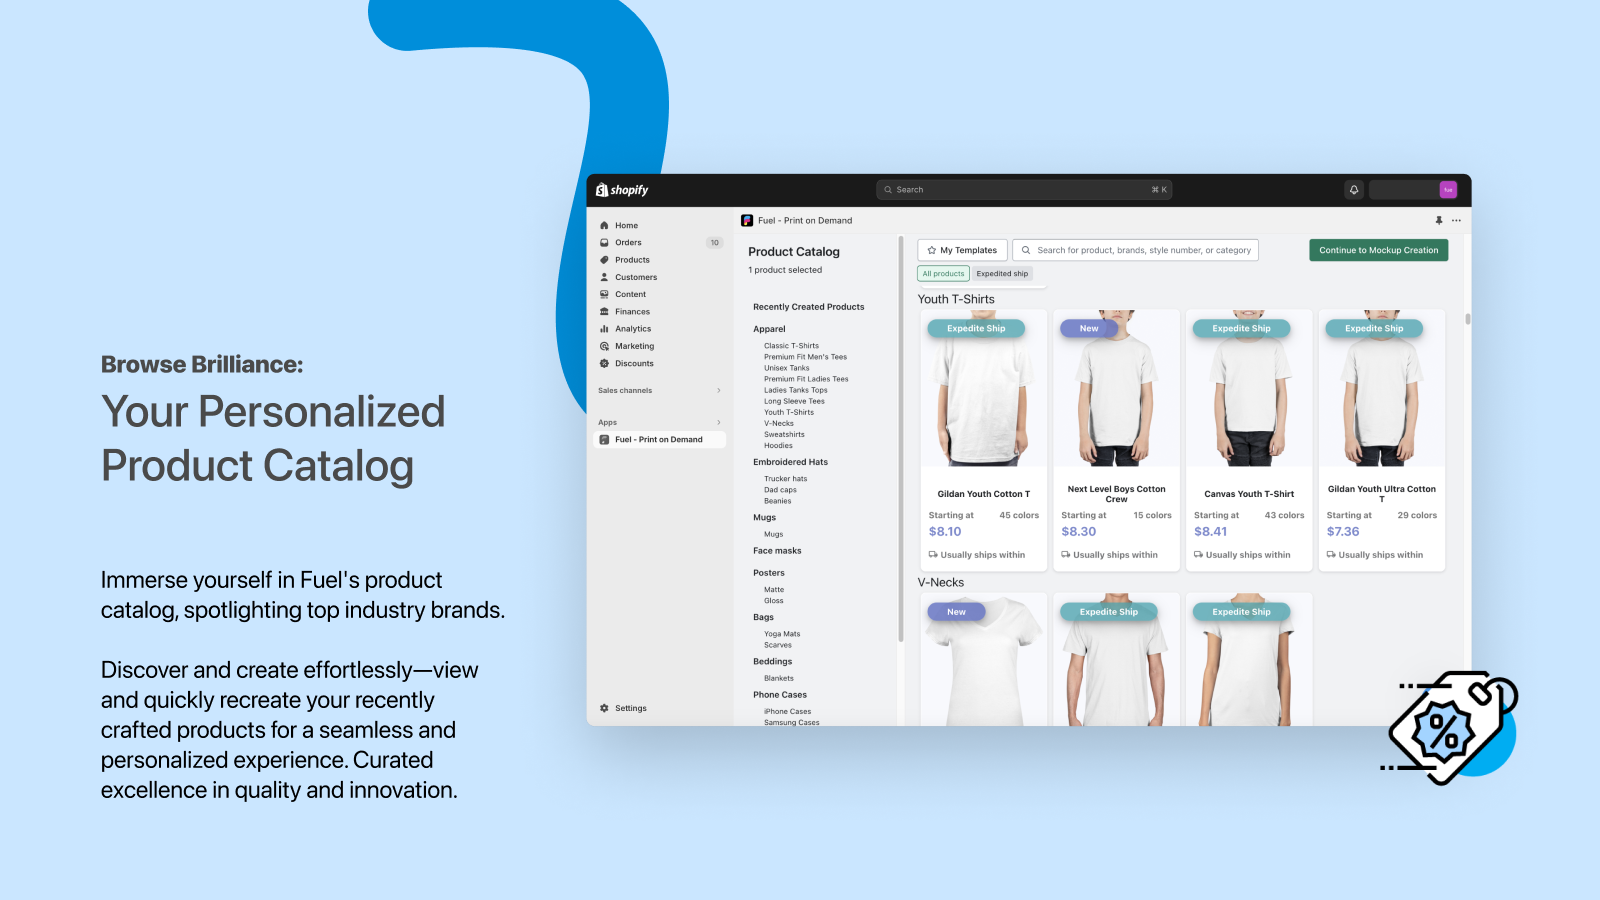 Browse Brilliance: Your Personalized Product Catalog